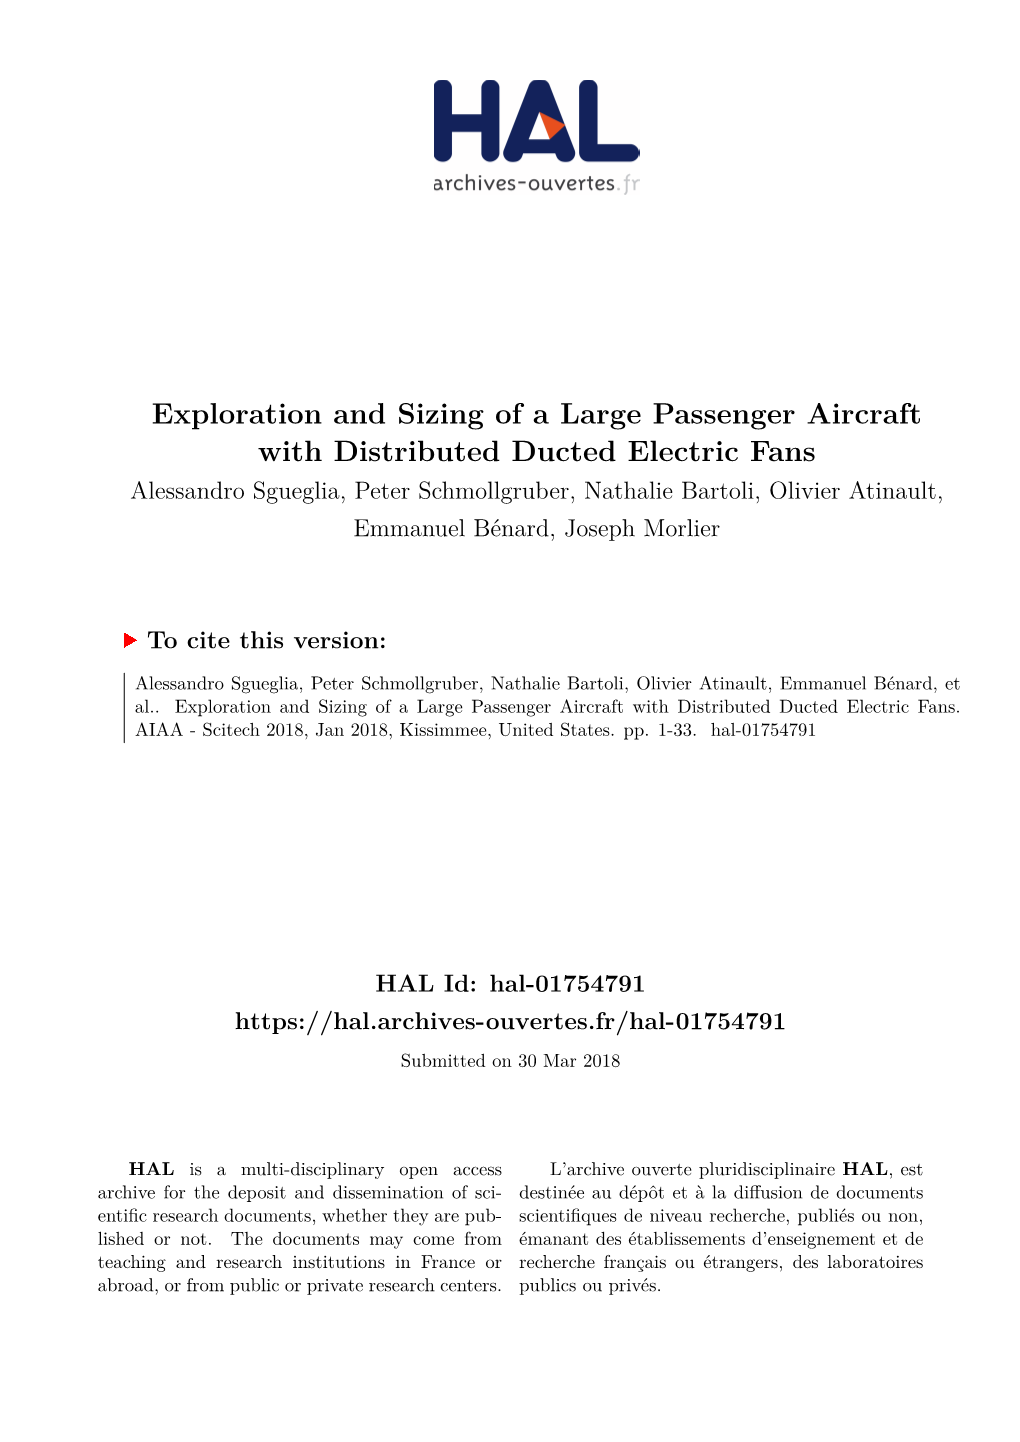 Exploration and Sizing of a Large Passenger Aircraft with Distributed